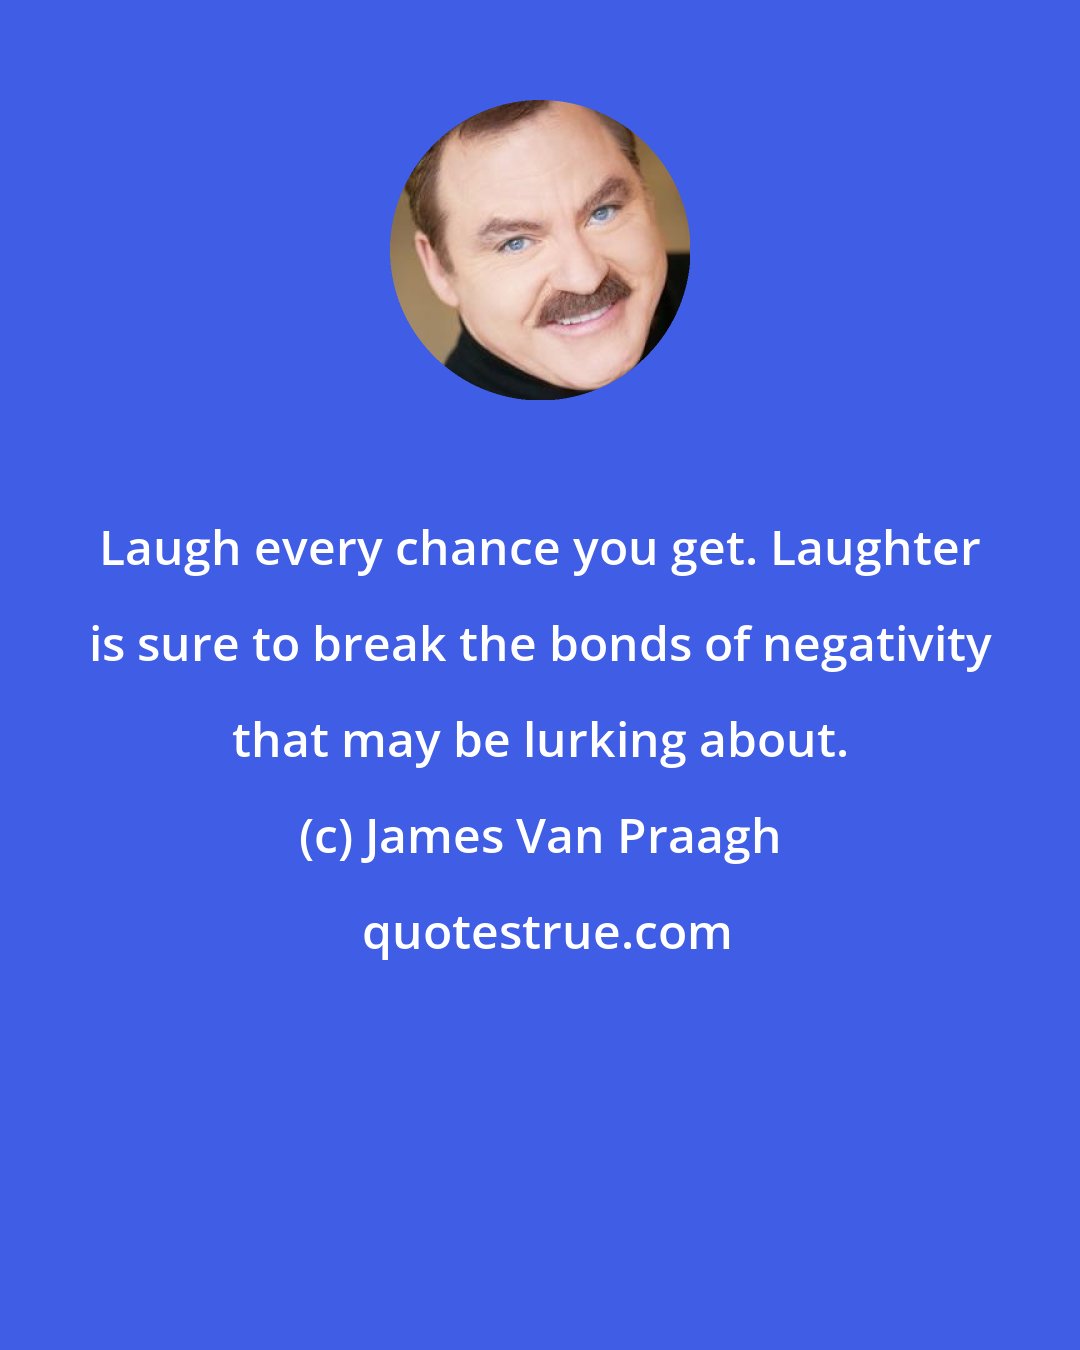 James Van Praagh: Laugh every chance you get. Laughter is sure to break the bonds of negativity that may be lurking about.